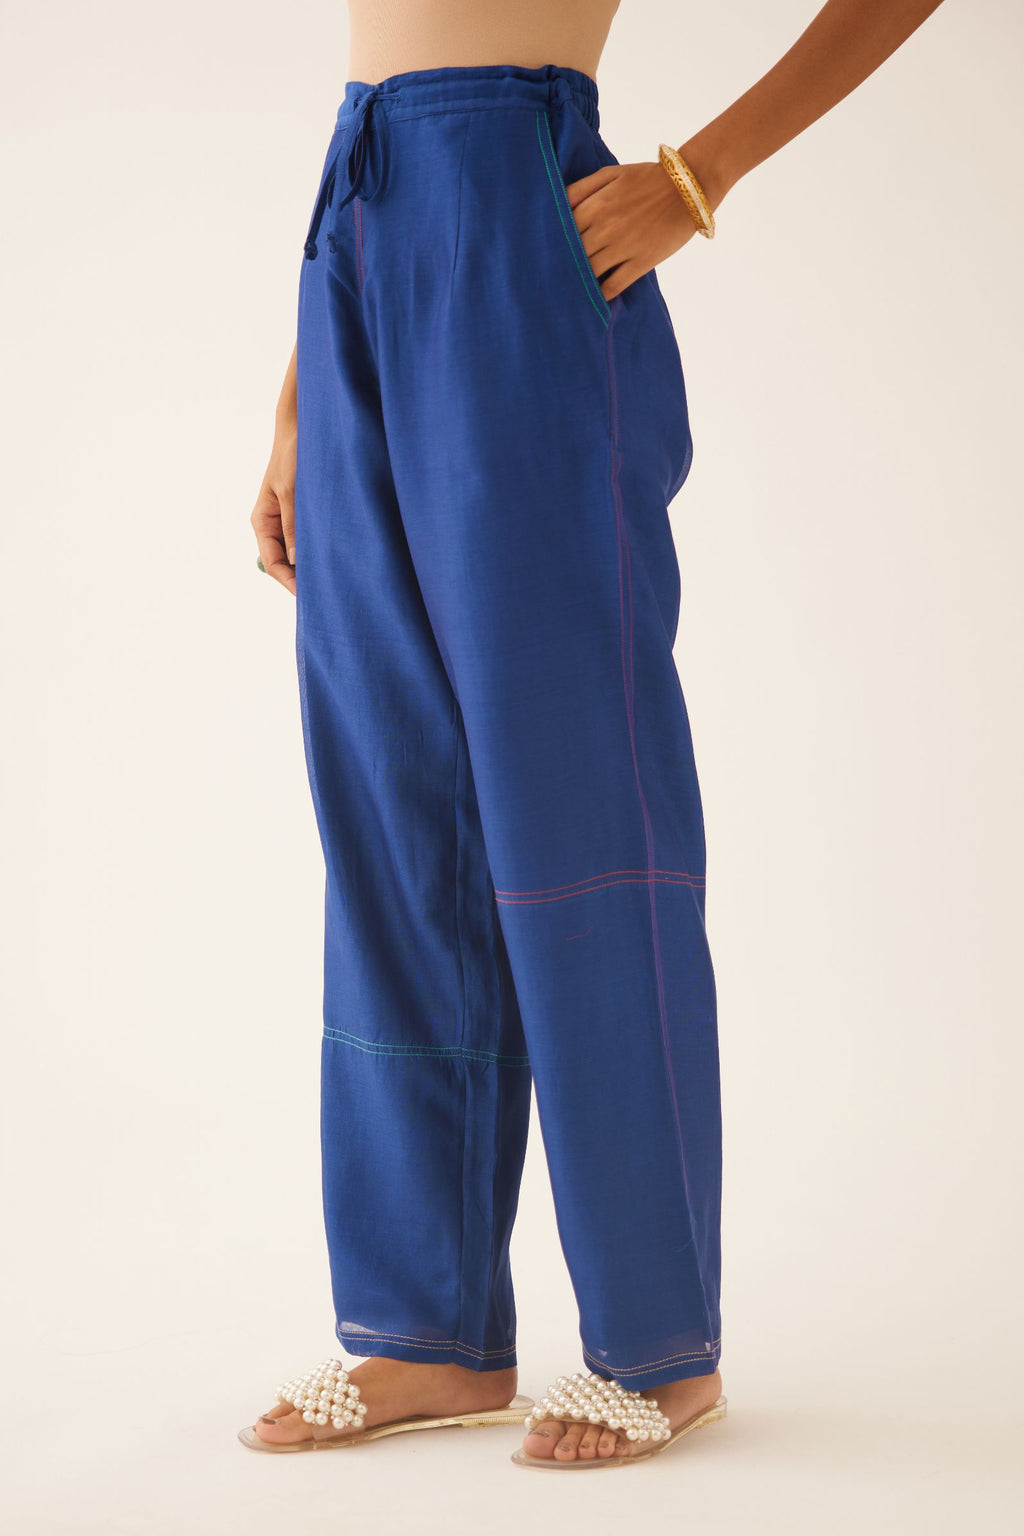 Blue silk chanderi straight pants, highlighted with multi colored thread stitch detail.